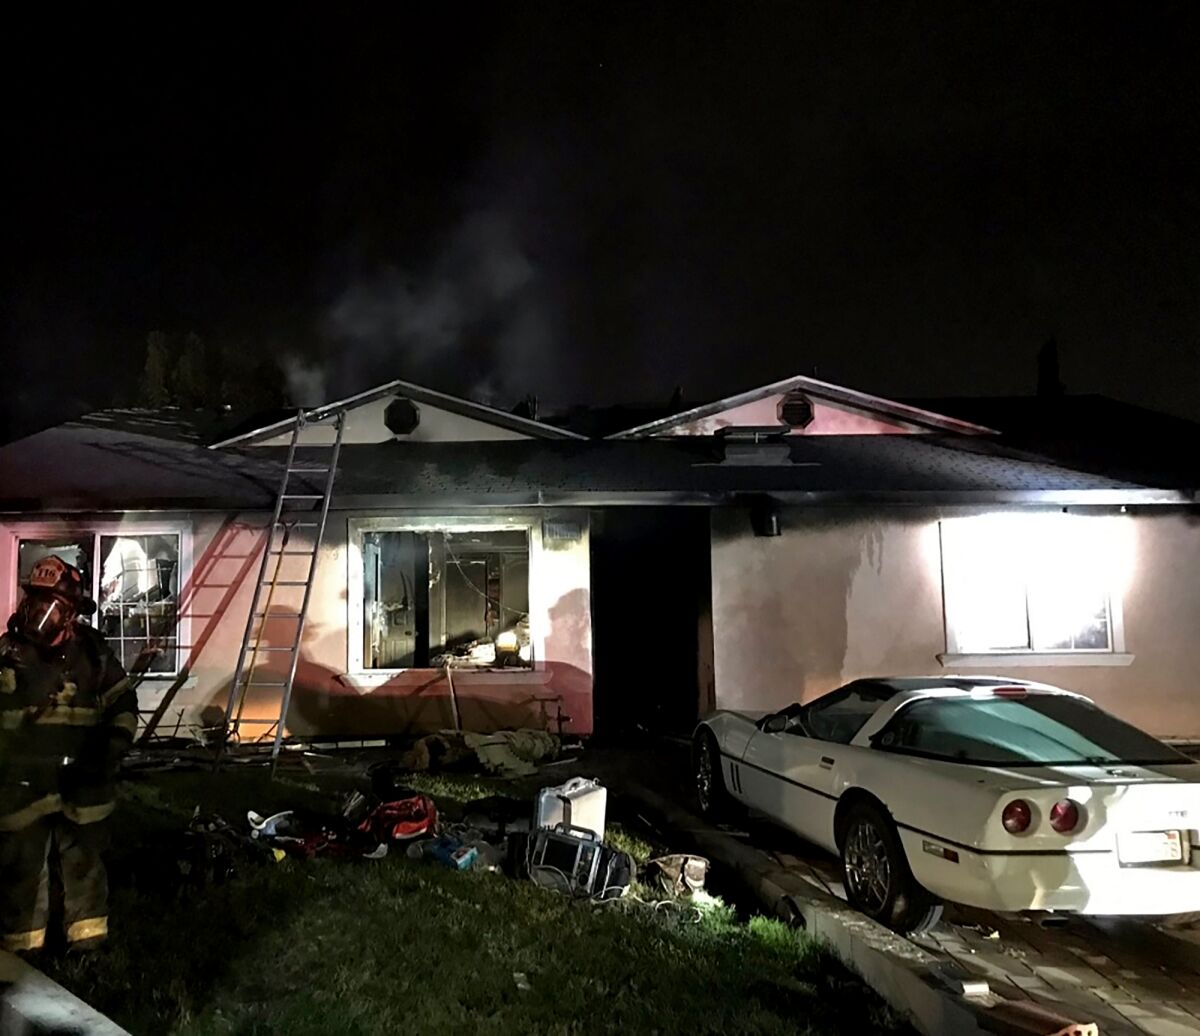 A house in San Jose caught fire Monday night after a man running from police barricaded himself inside, authorities say.